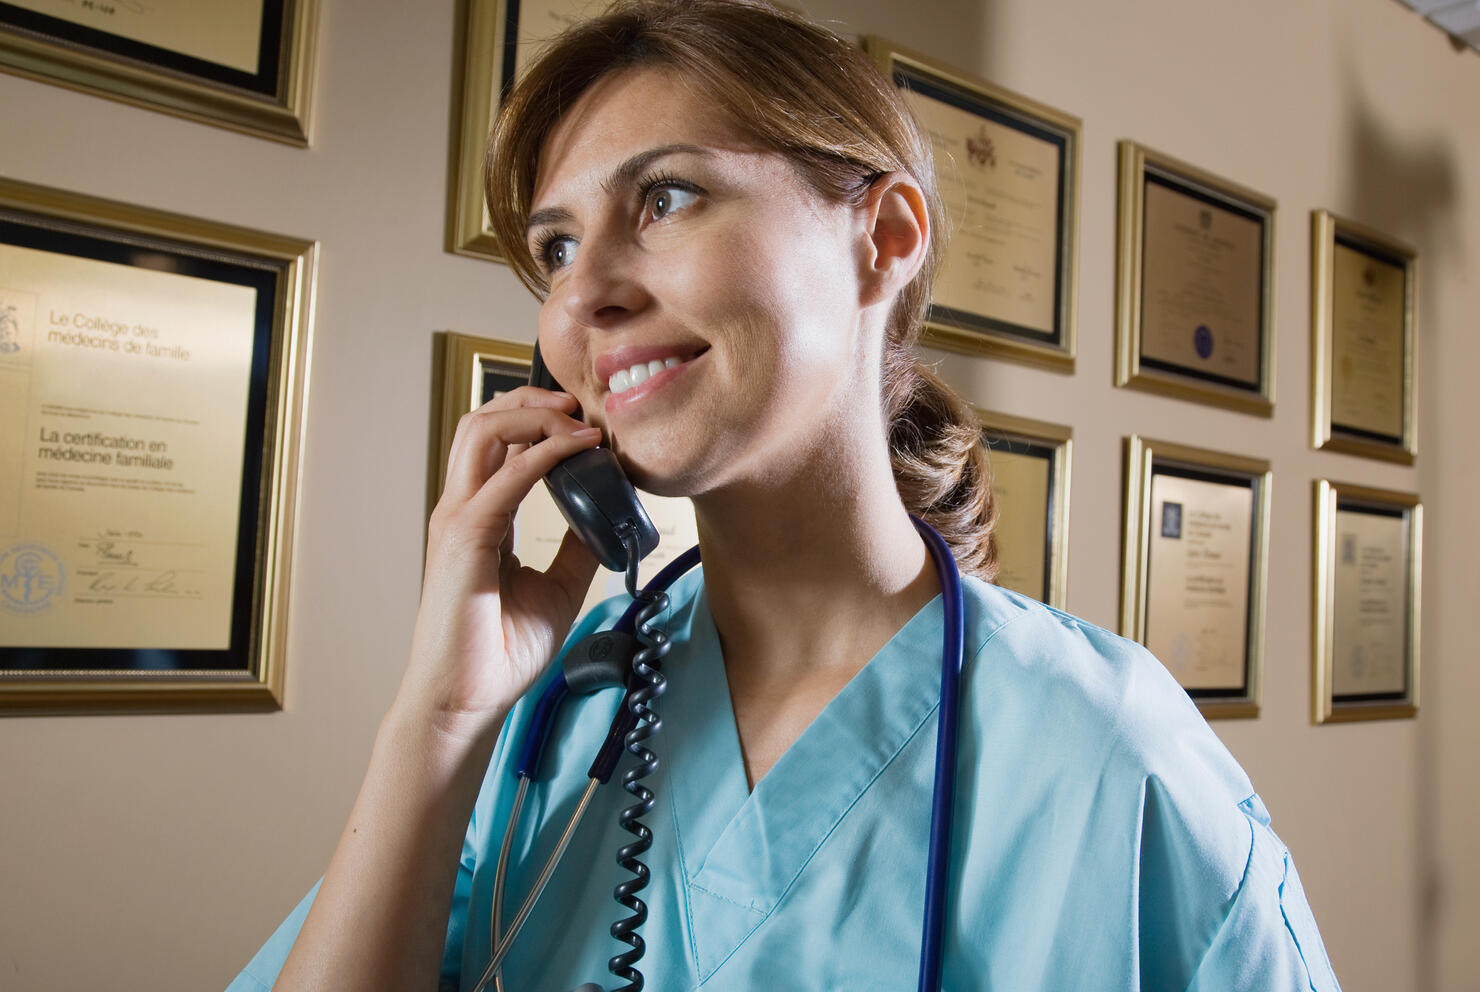 Nurse answering the phone at reception